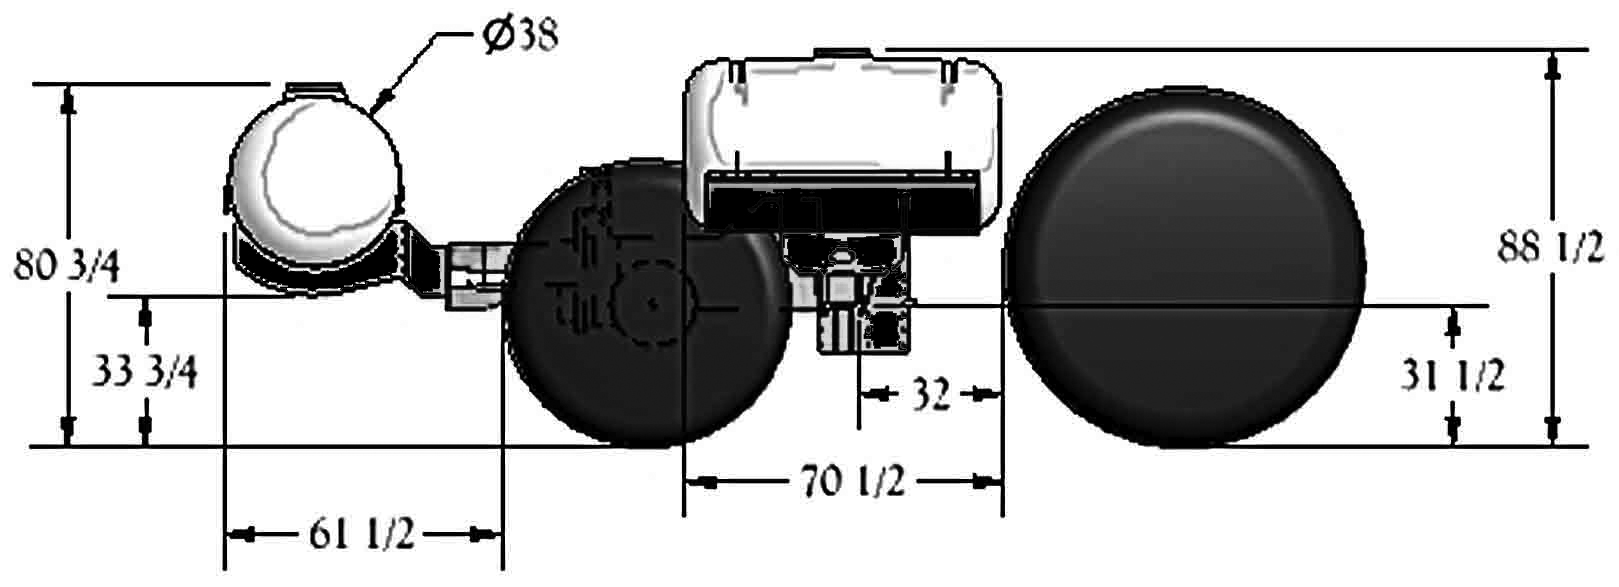 Standard Helicopter Tank Dimensions